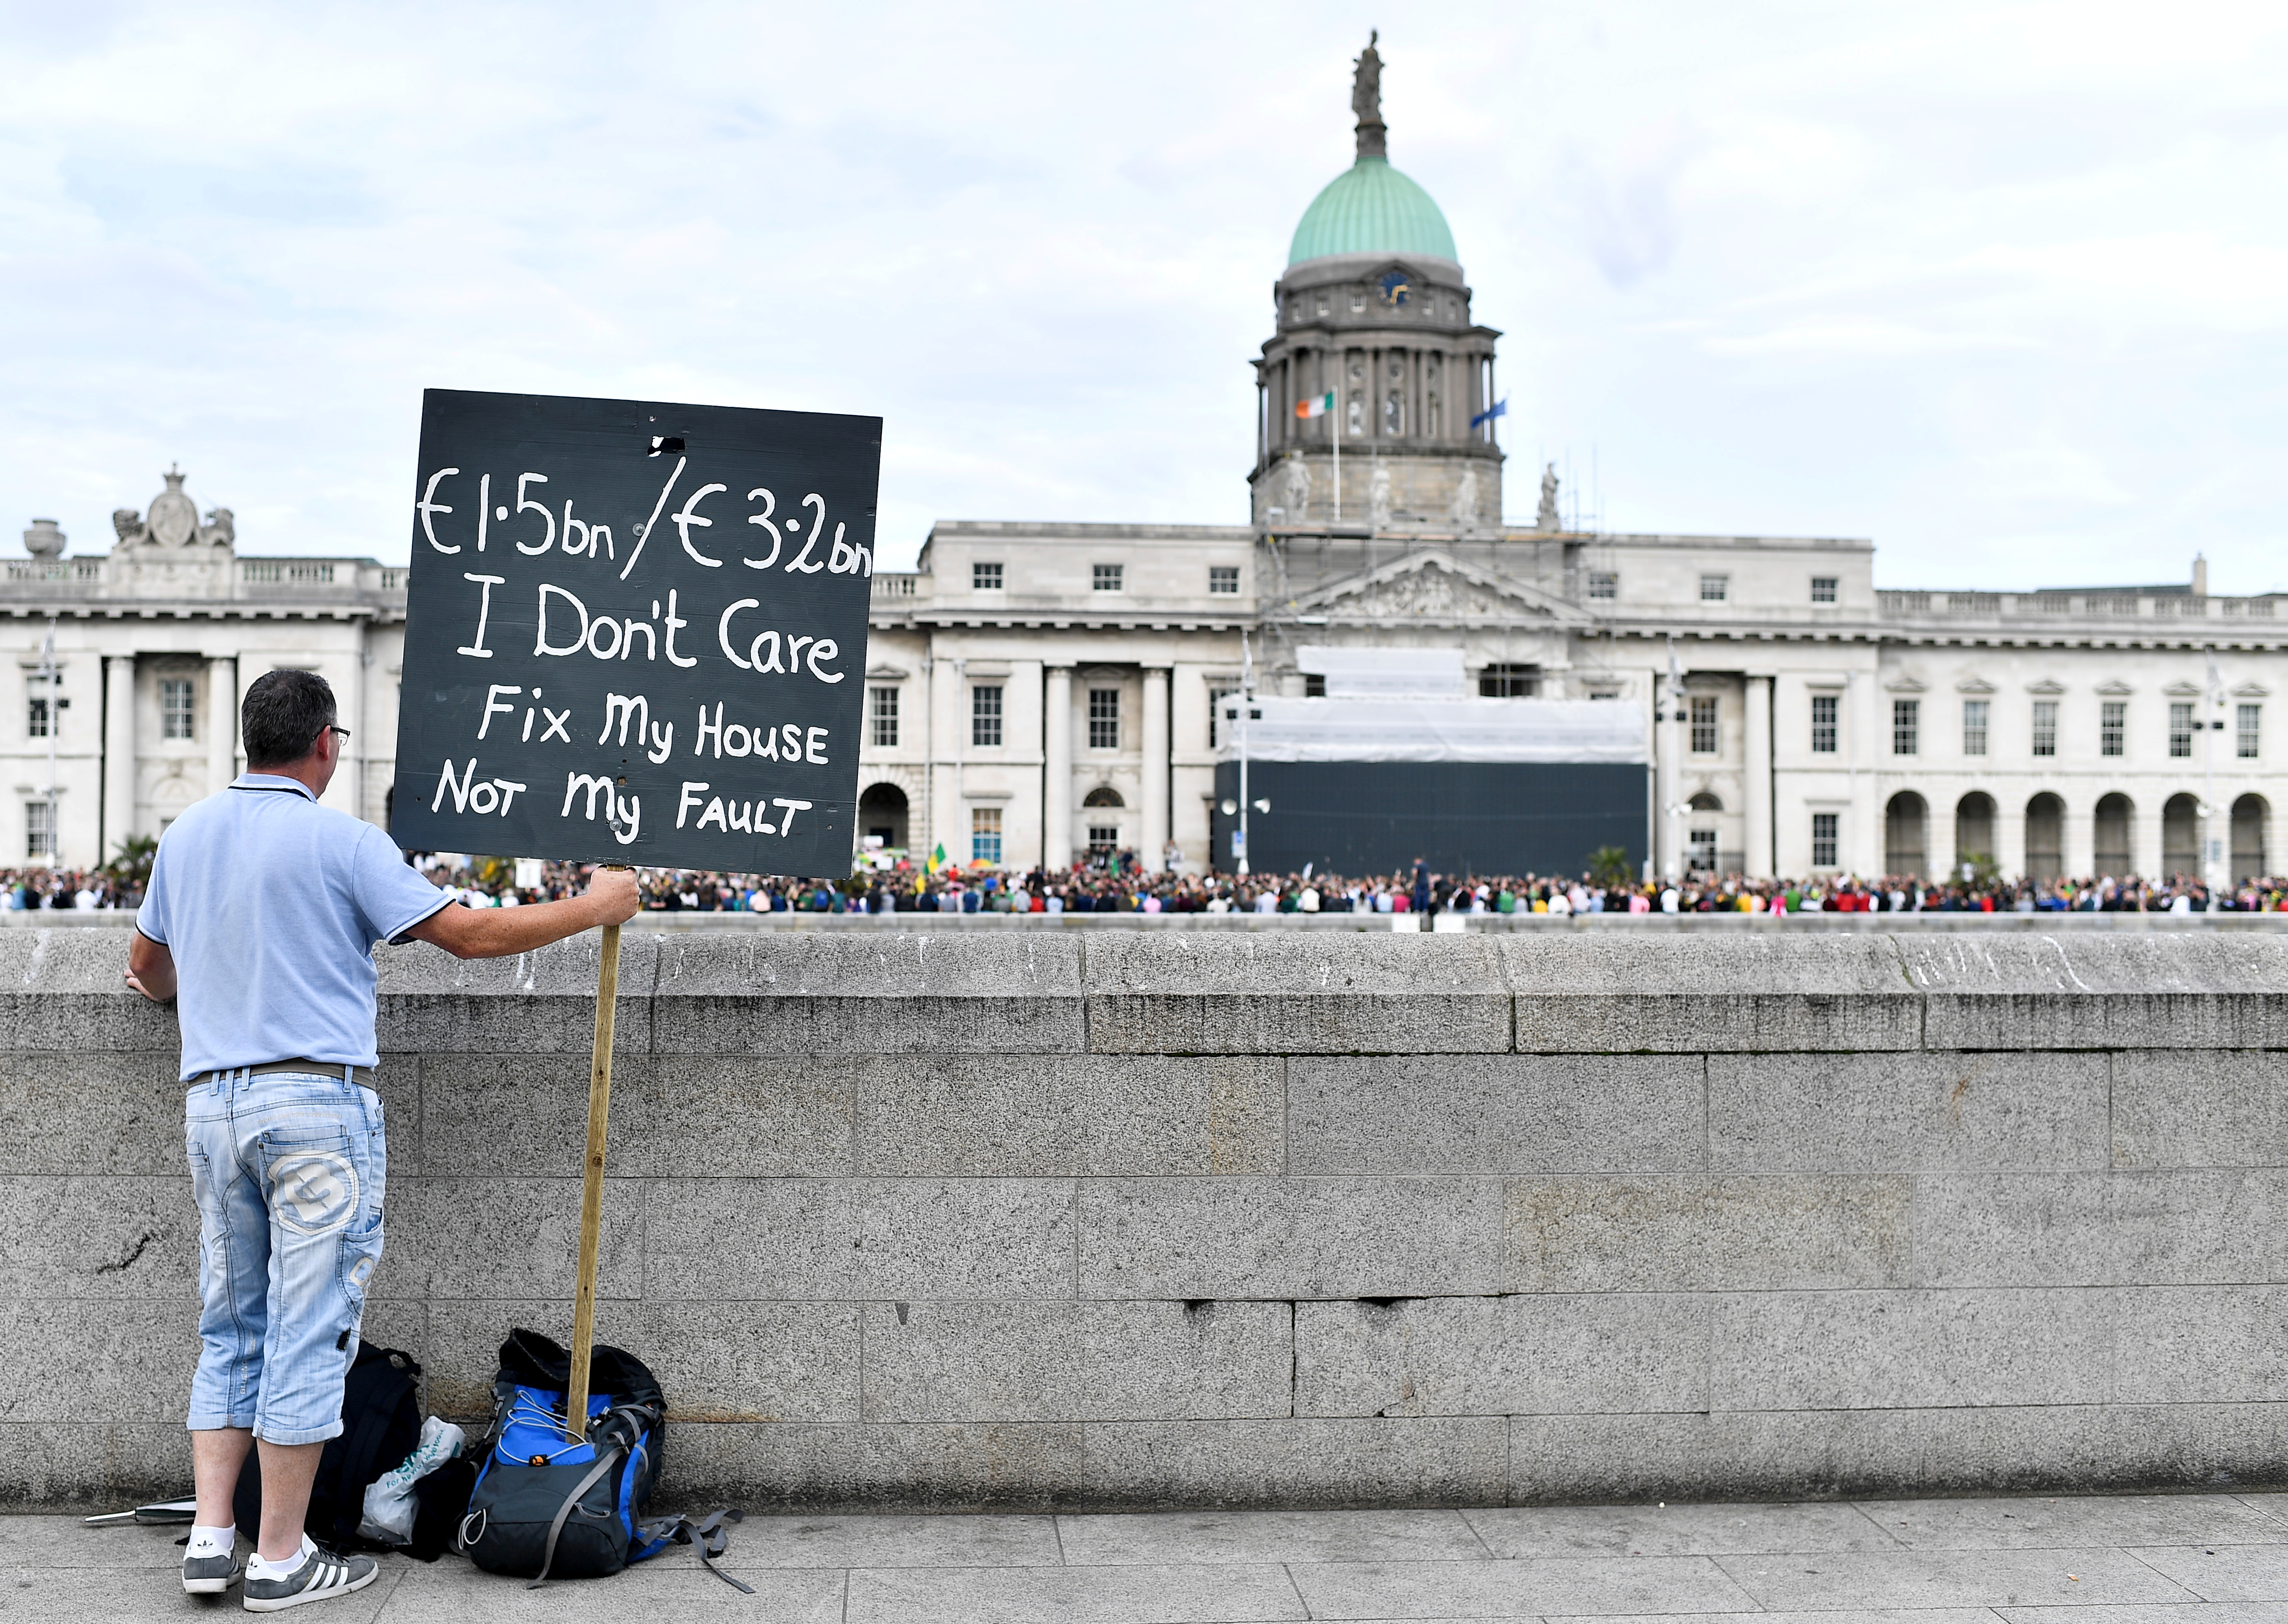 A person holds up a placard during a demonstration demanding redress for the usage of porous mica blocks in housing, in Dublin, Ireland, October 8, 2021. REUTERS/Clodagh Kilcoyne/File Photo